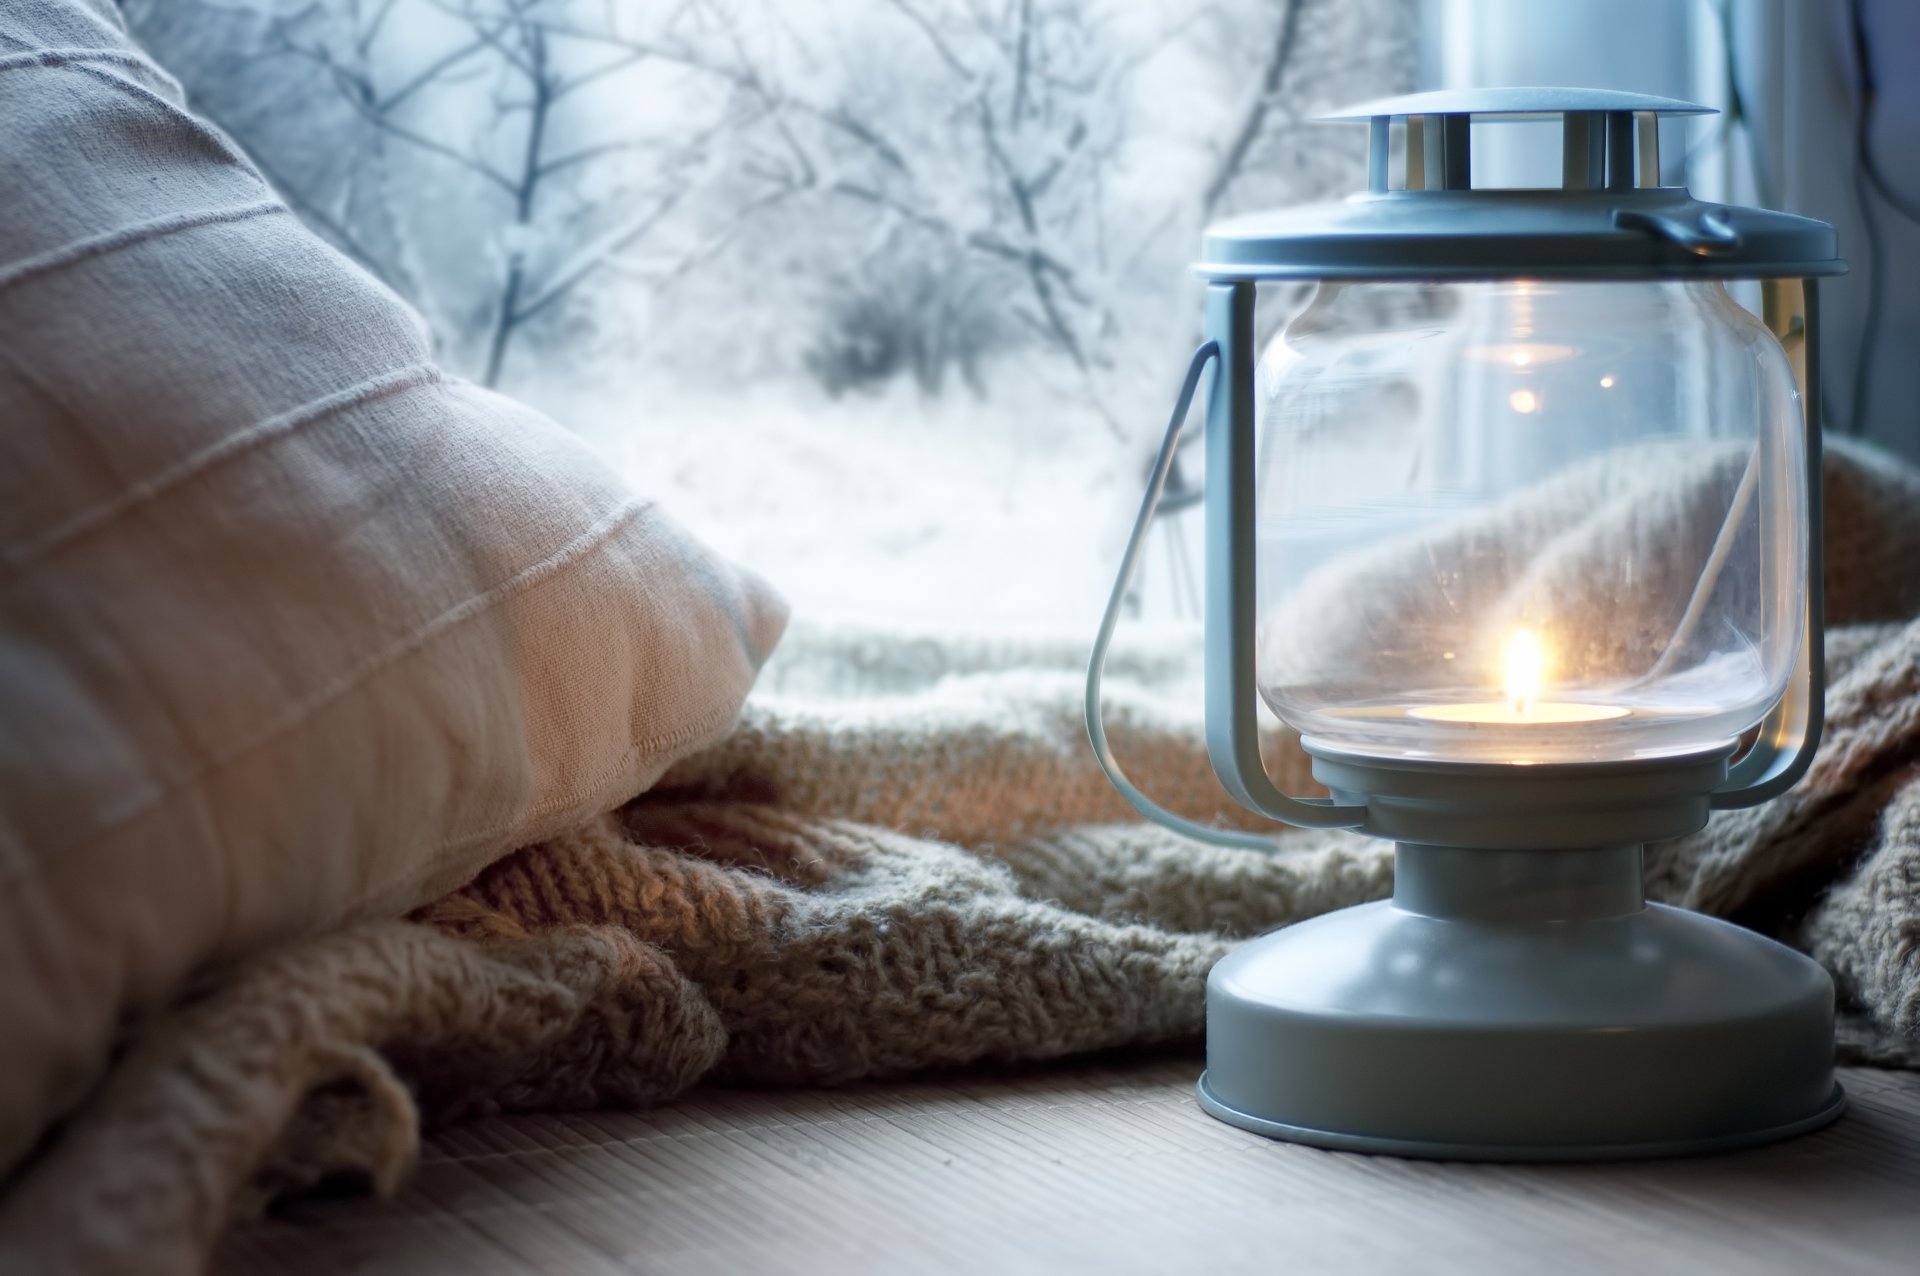 Tips for Adding Warmth to Home